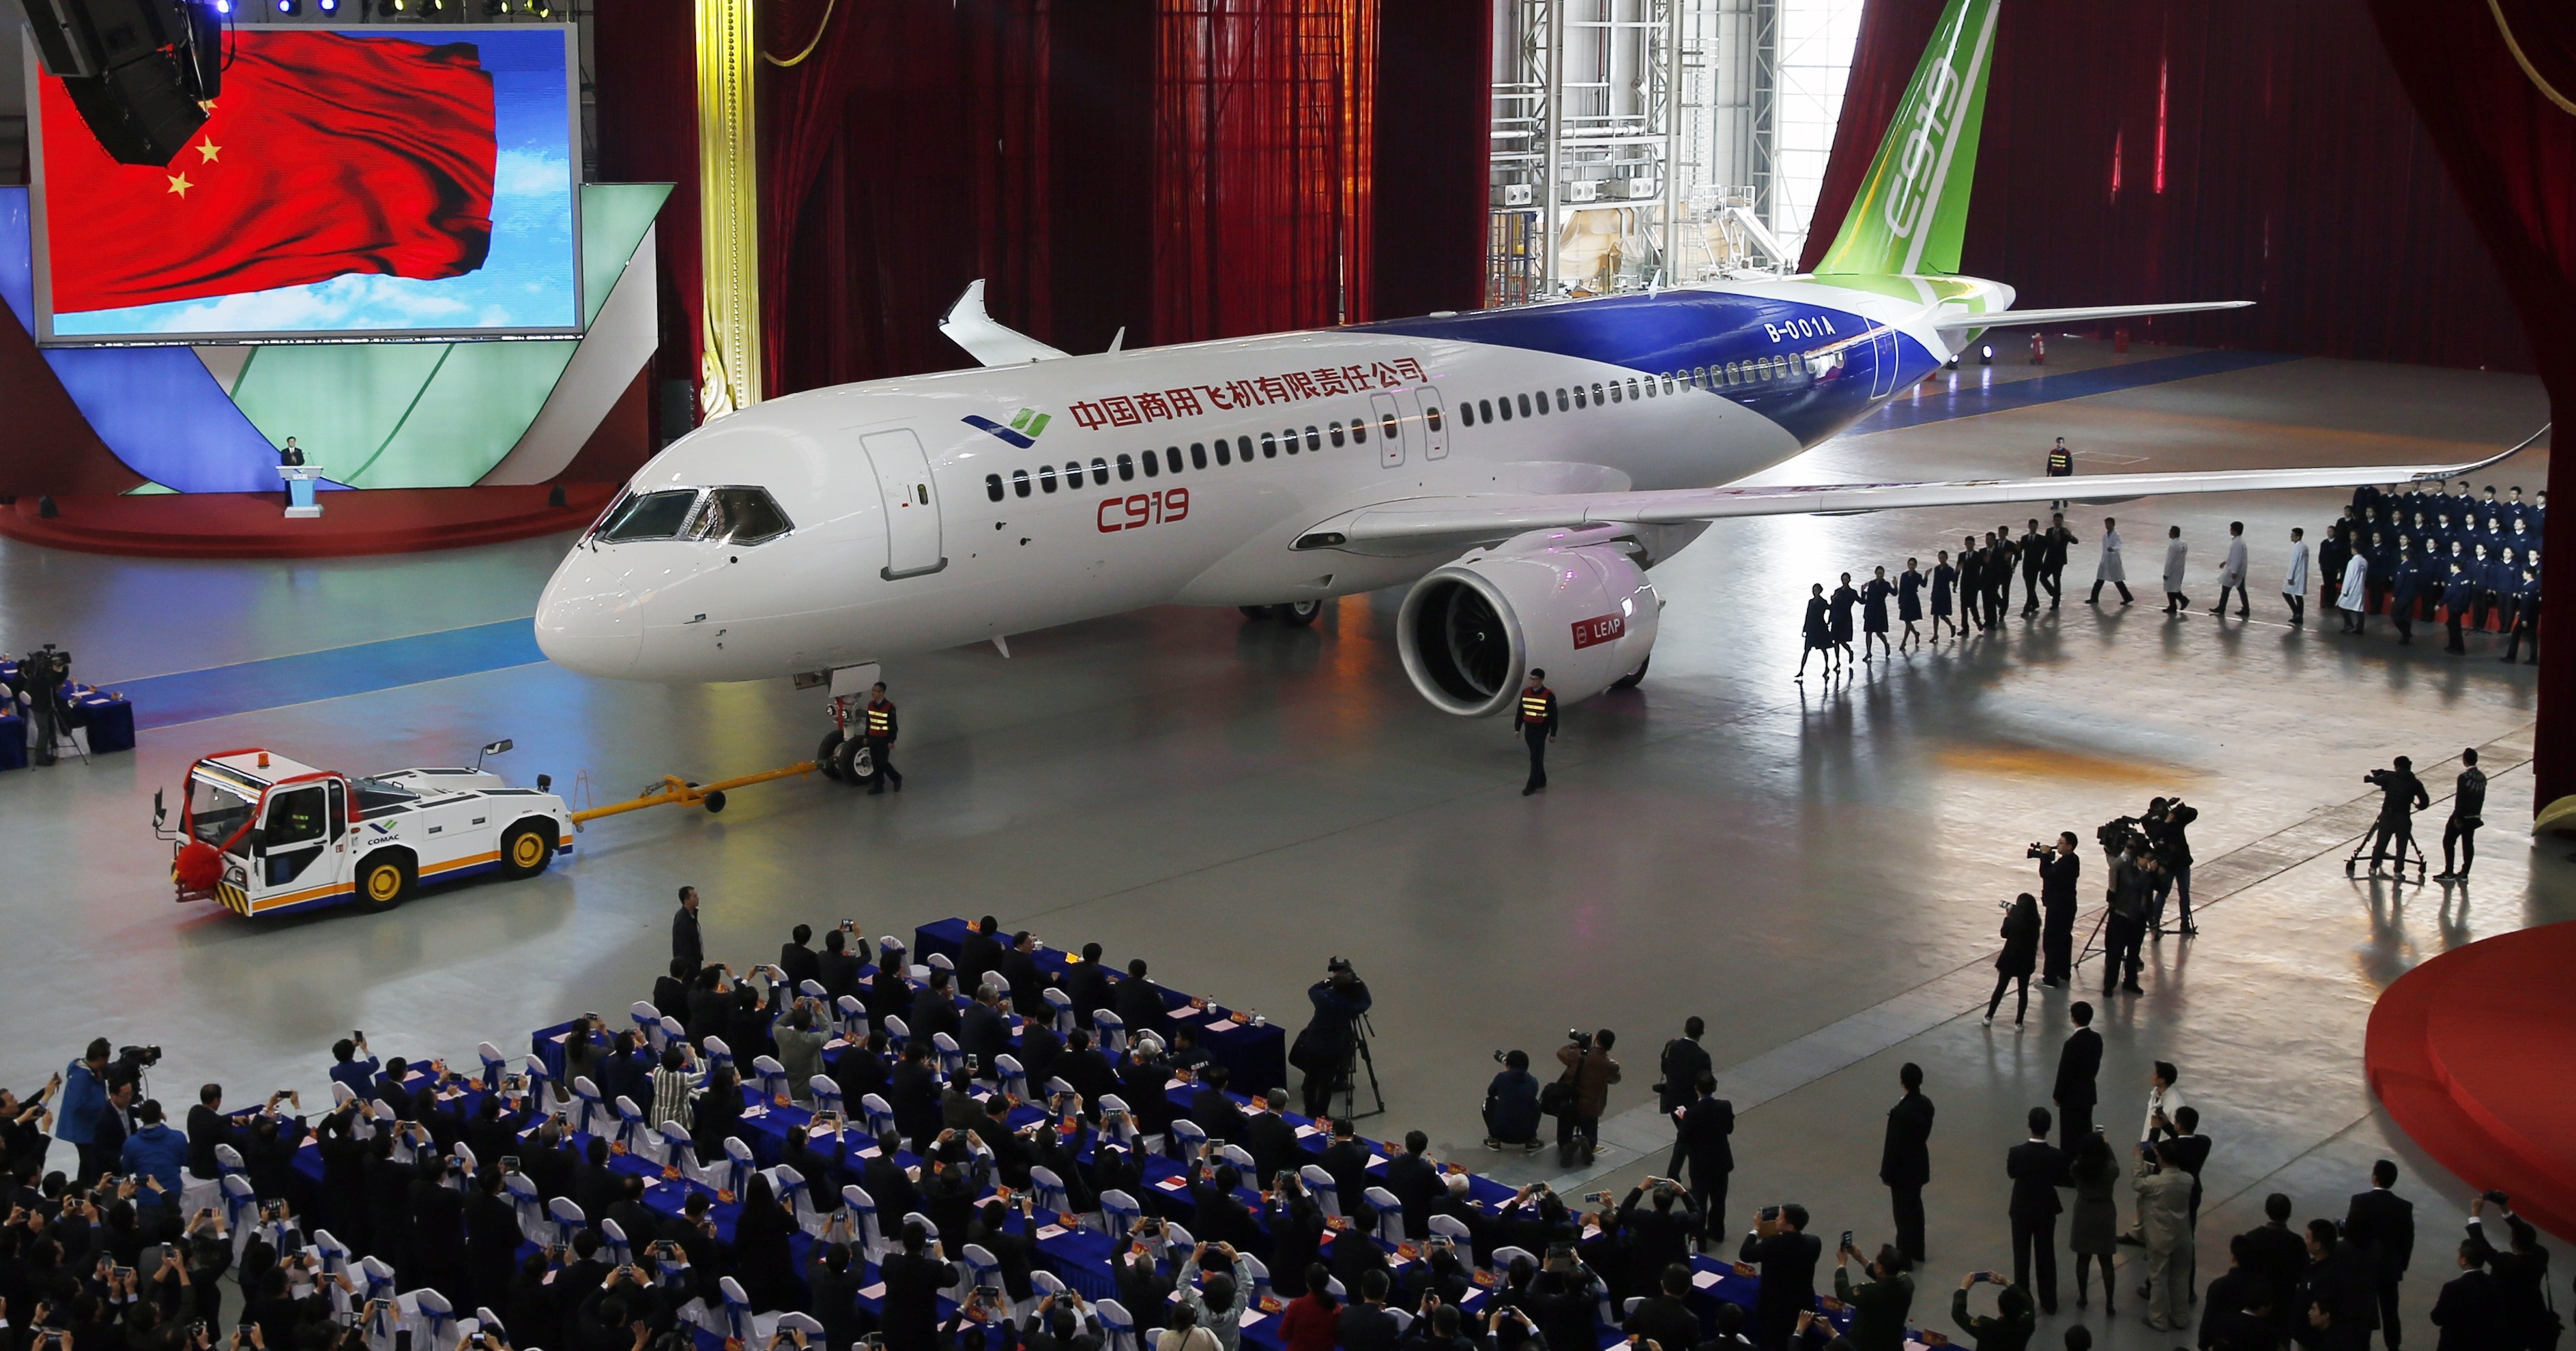 Launch of the COMAC C919 on 2 November 2015. (Getty/Stringer)